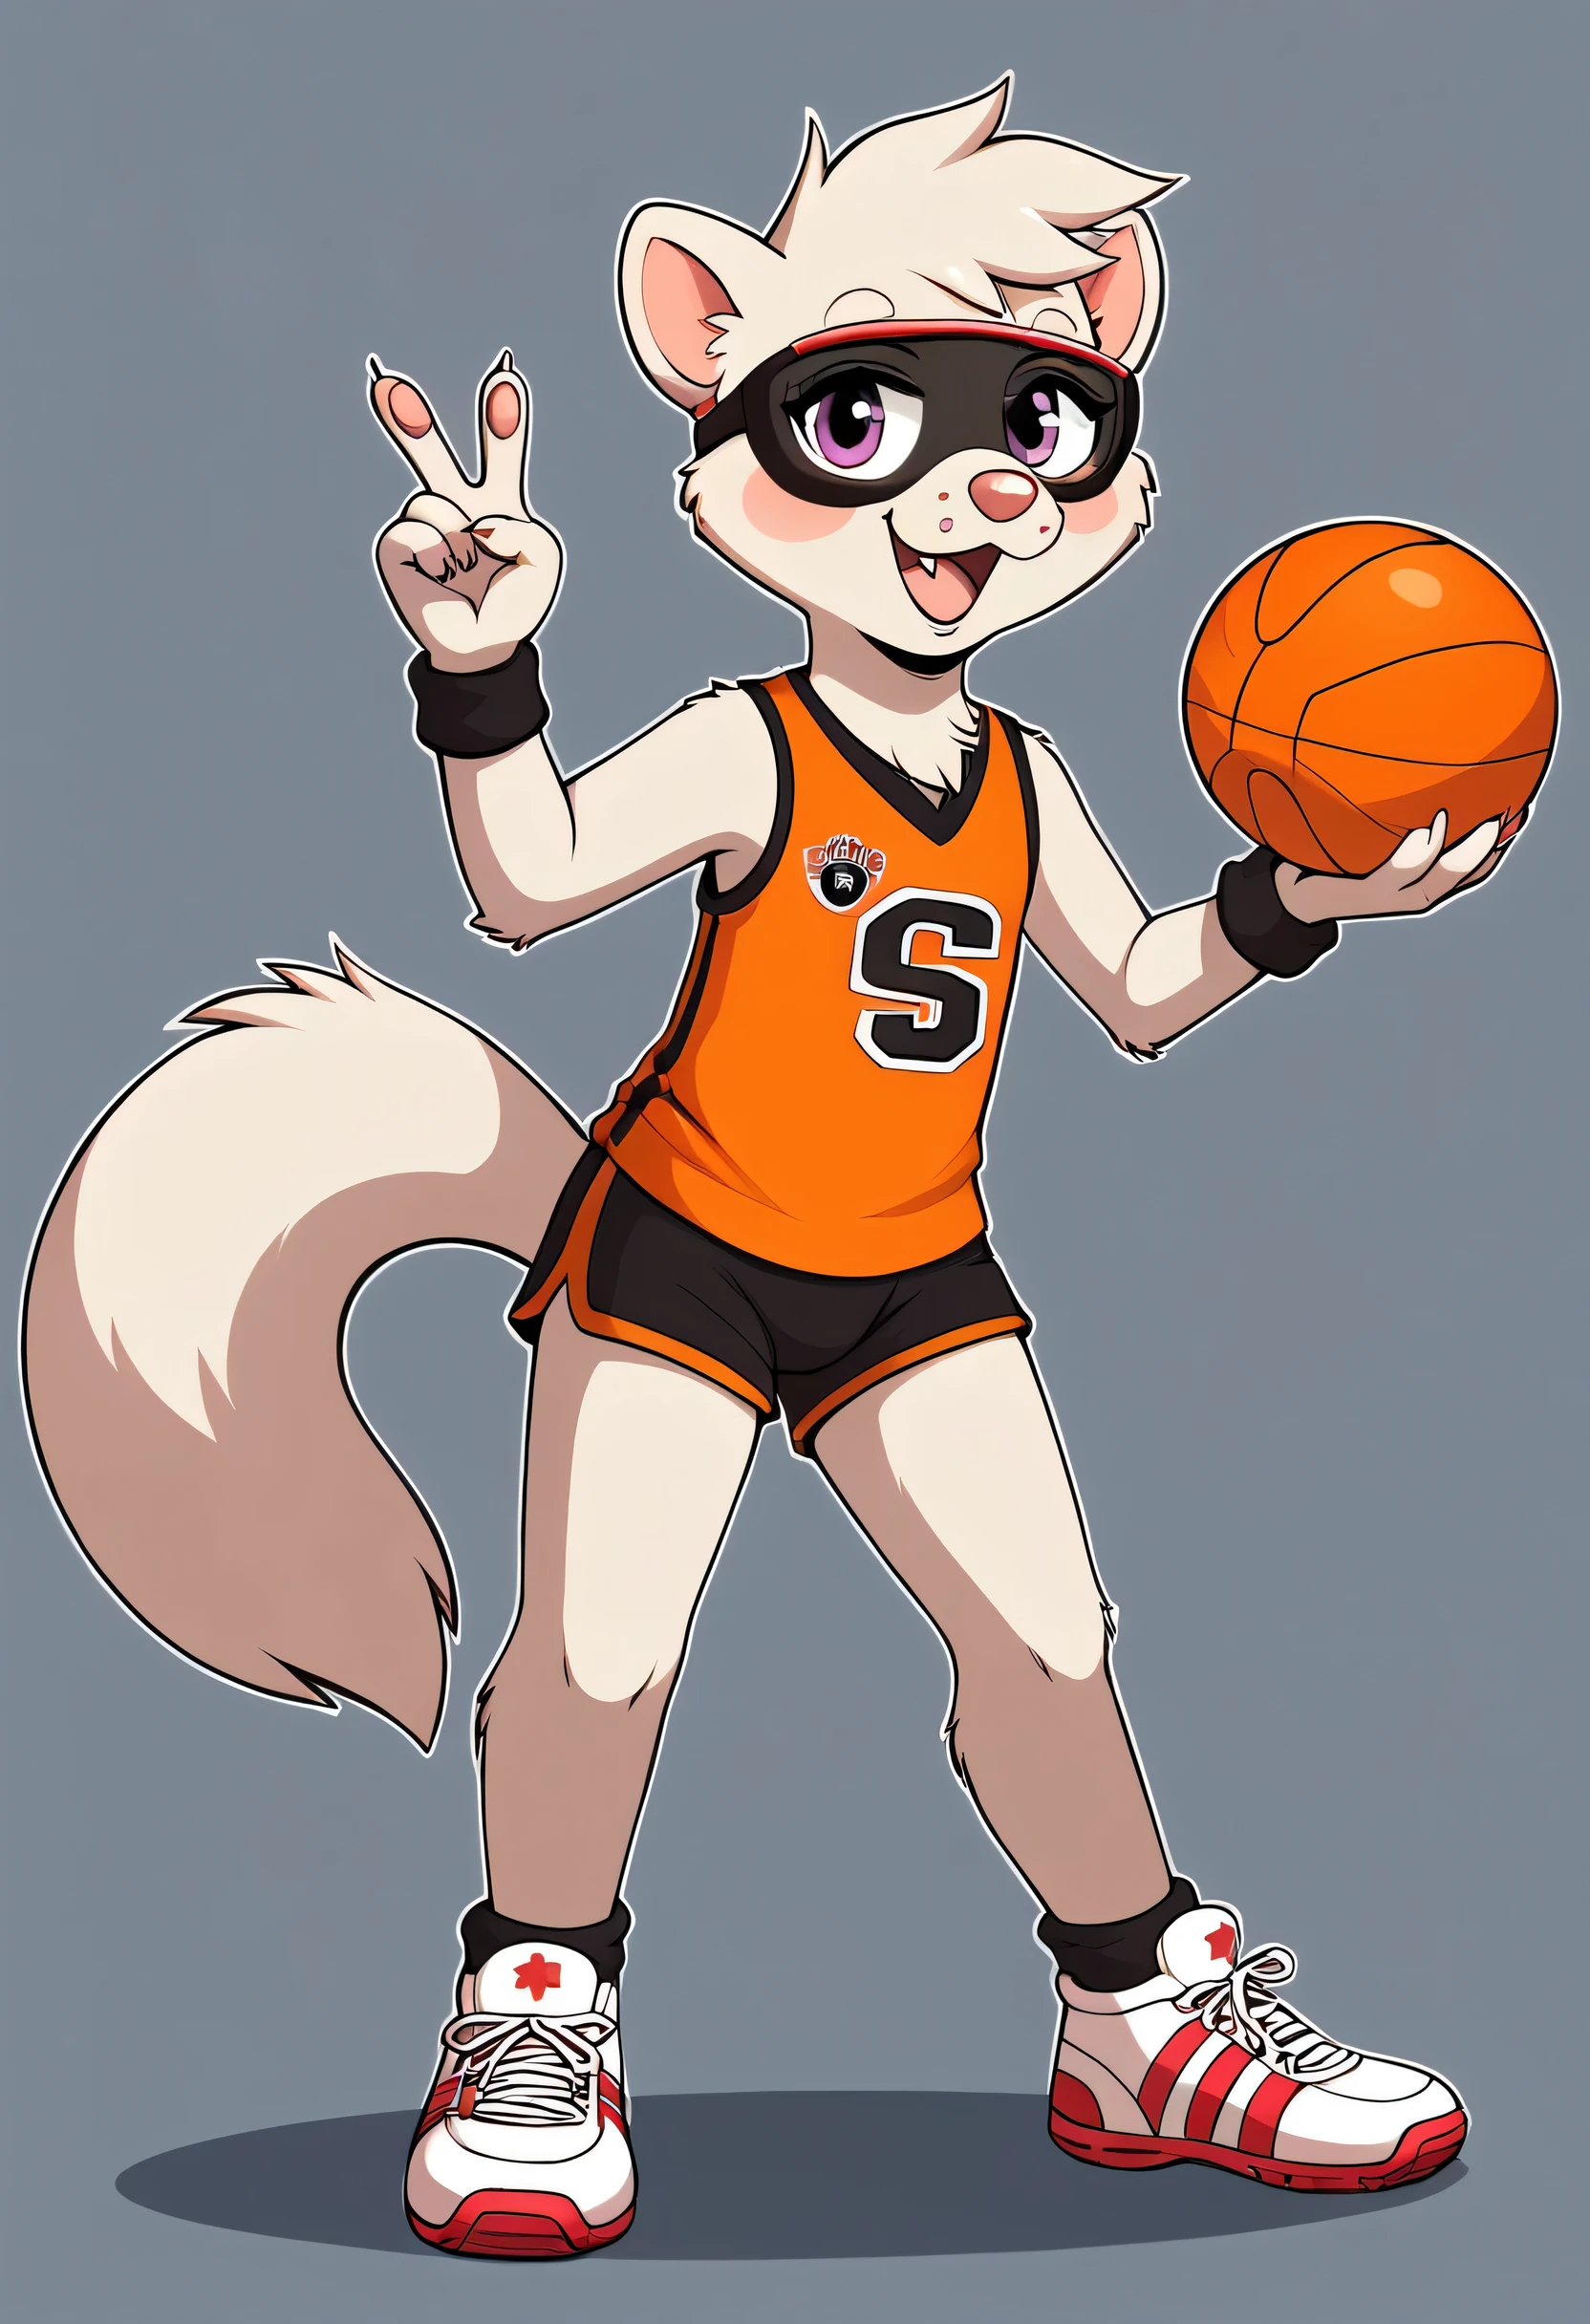 Generate a sports mascot based on a ferret playing with a ball